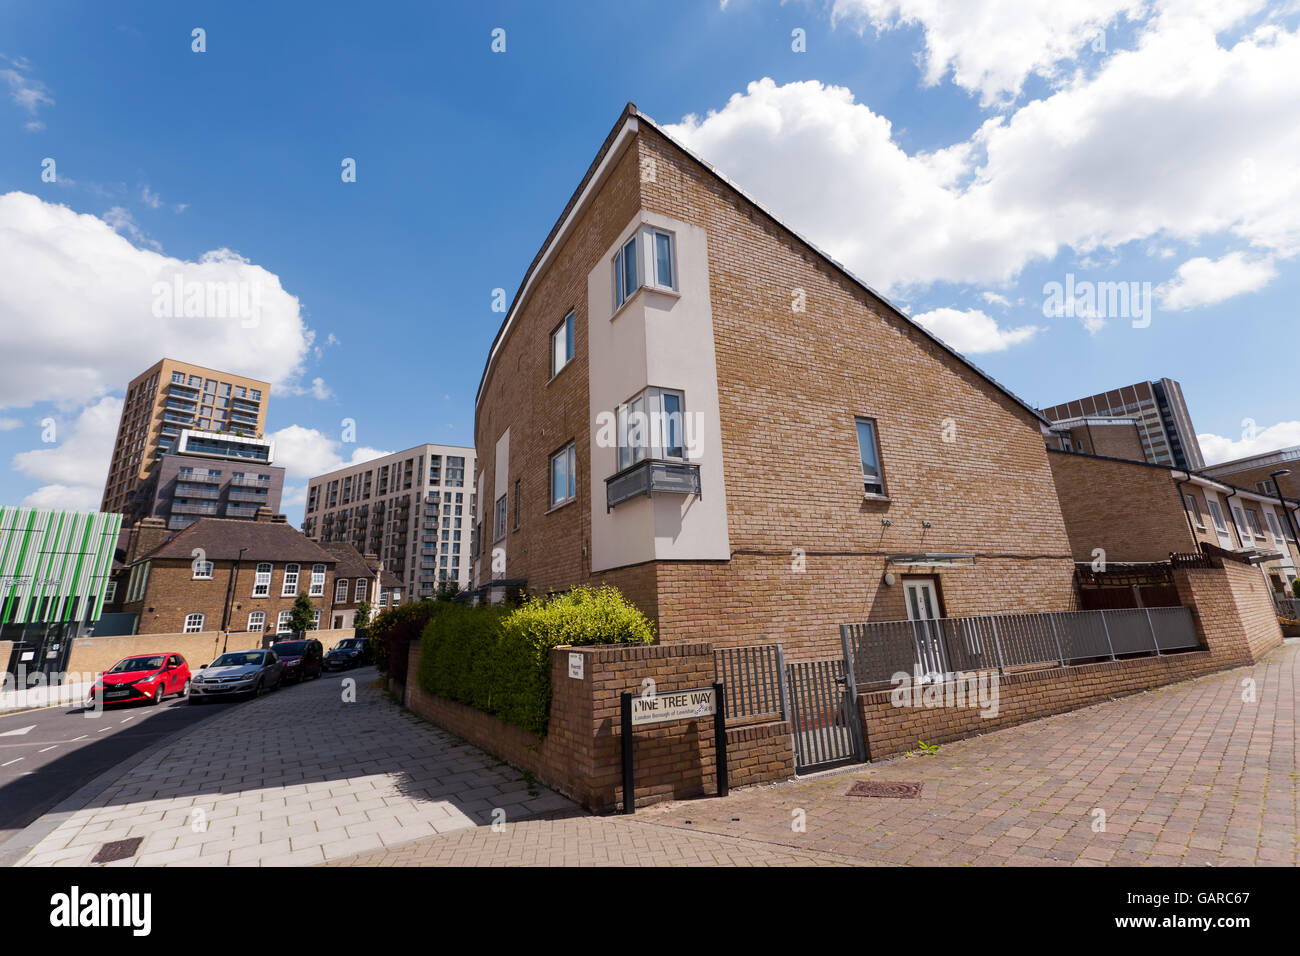 Affordable Housing at the junction of Pine tree Way and Elmira Street, Lewisham, London. Part of the Rivermill Park Development Stock Photo